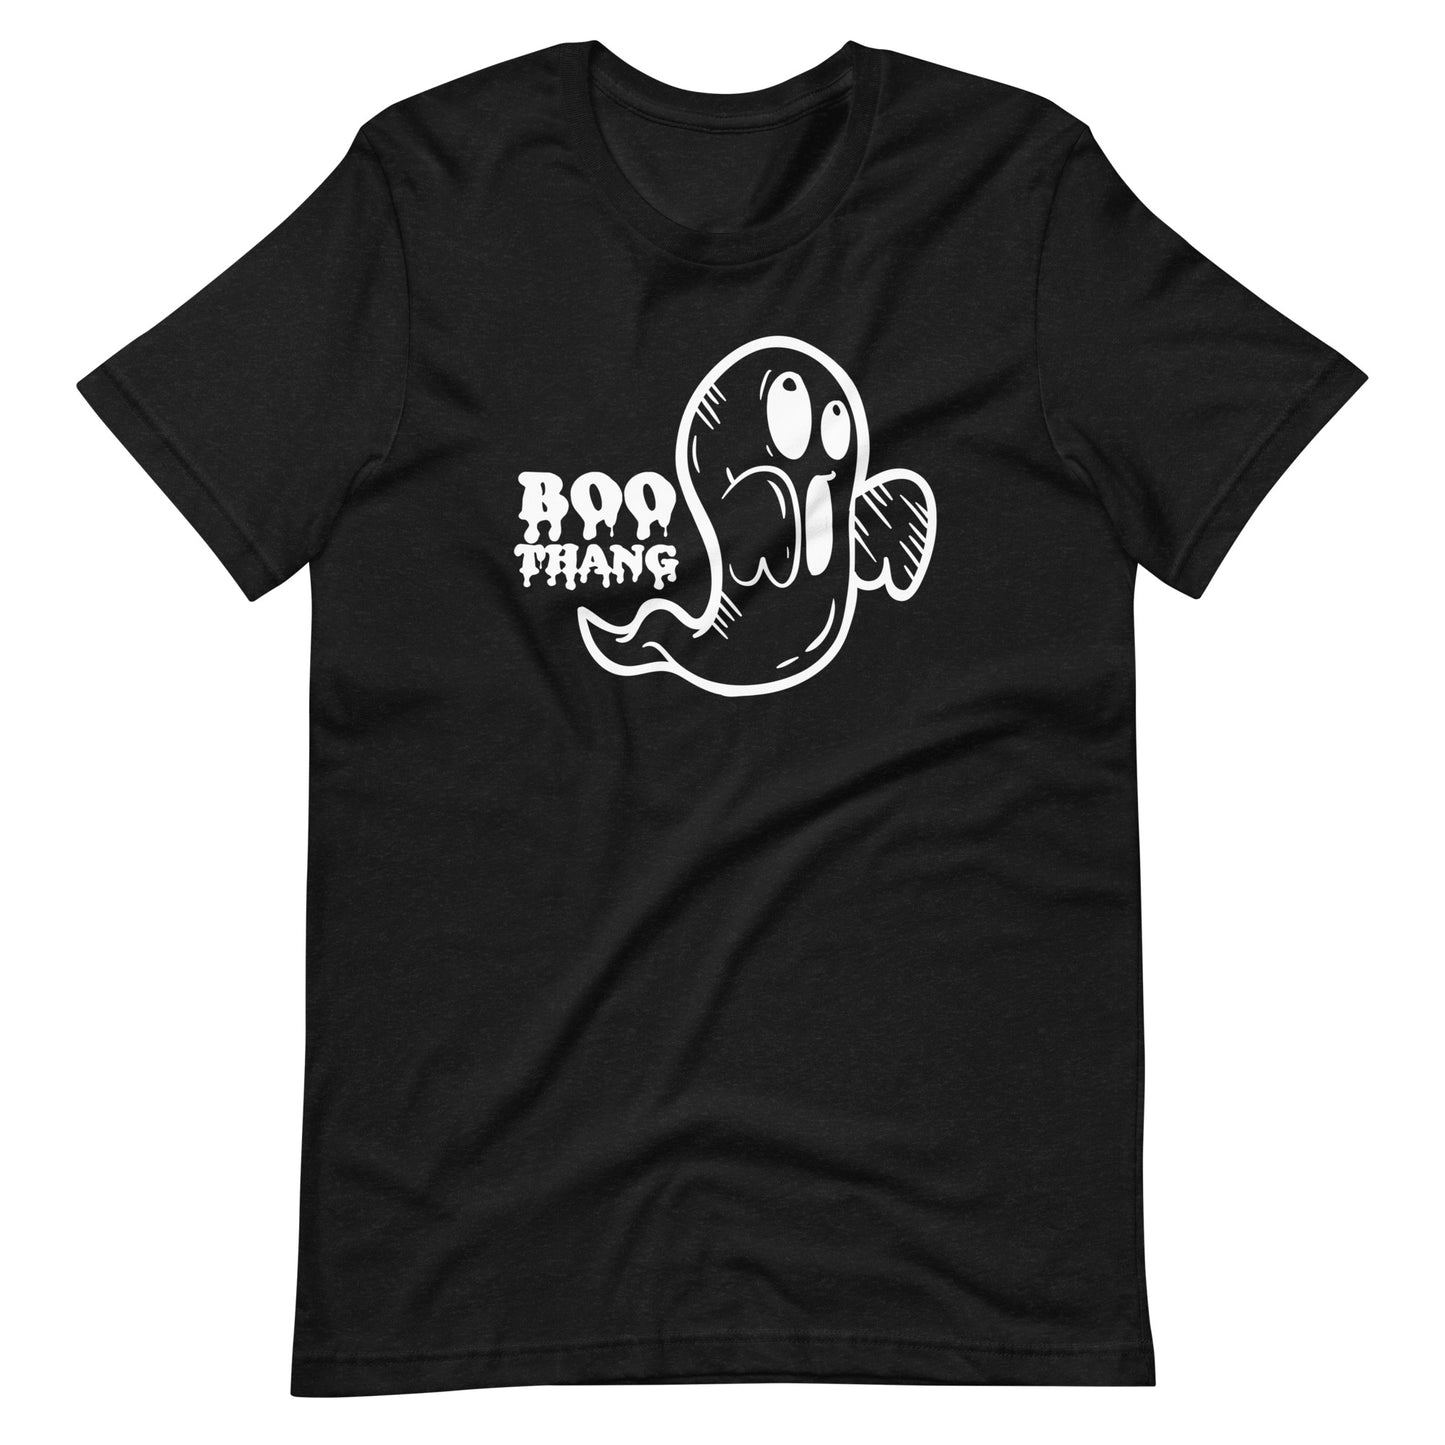 Boo thang Unisex t-shirt in White